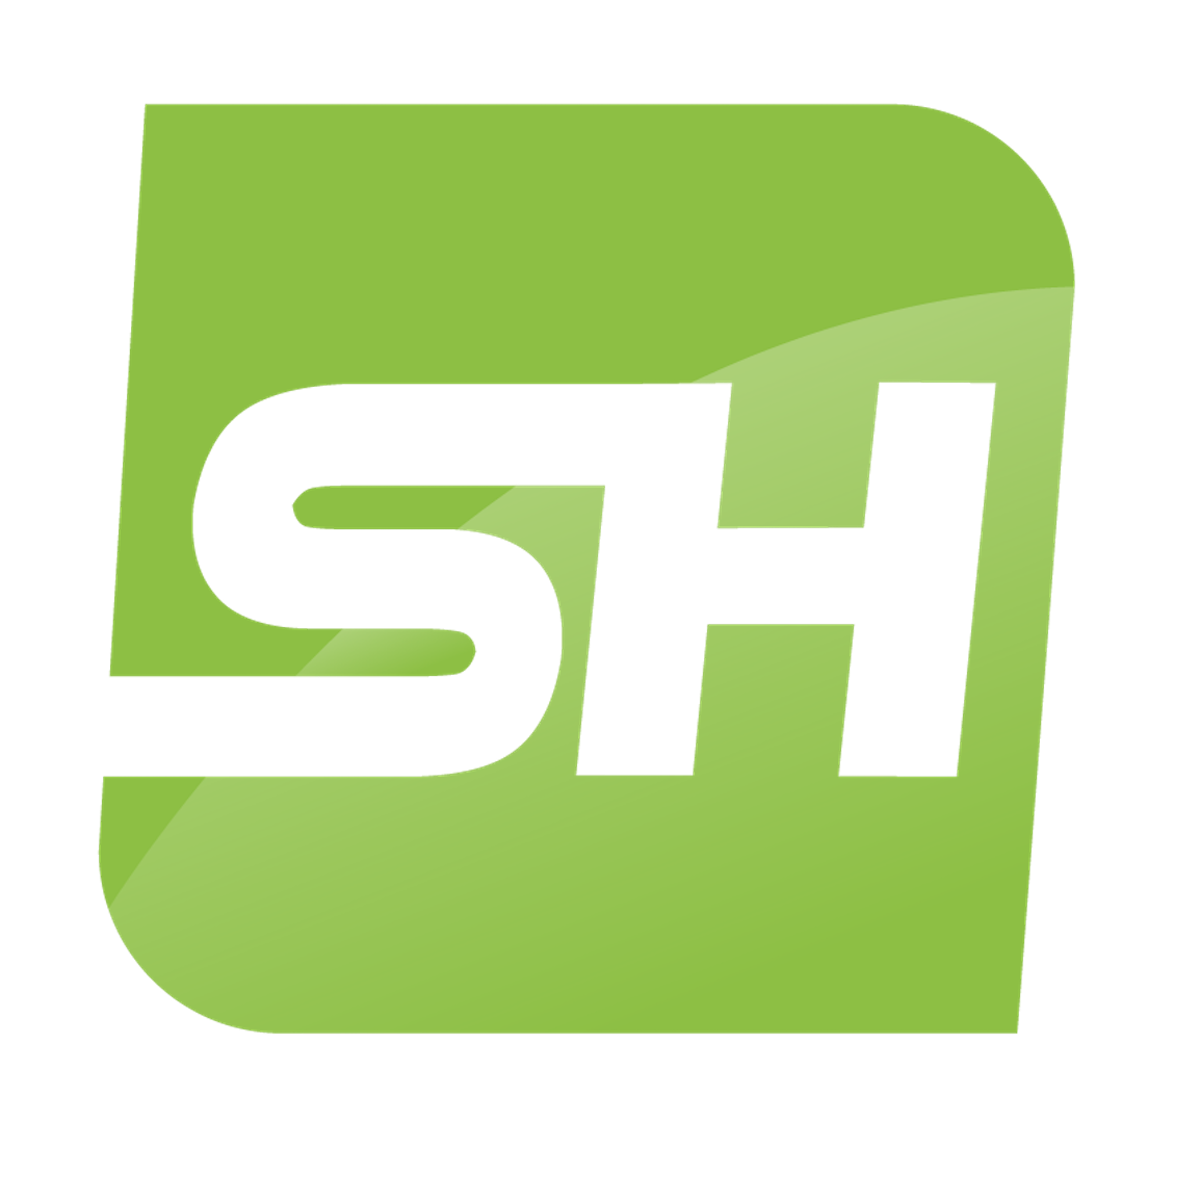 Hire Shopify Experts to integrate ShippingHub ‑ ship all over SA app into a Shopify store